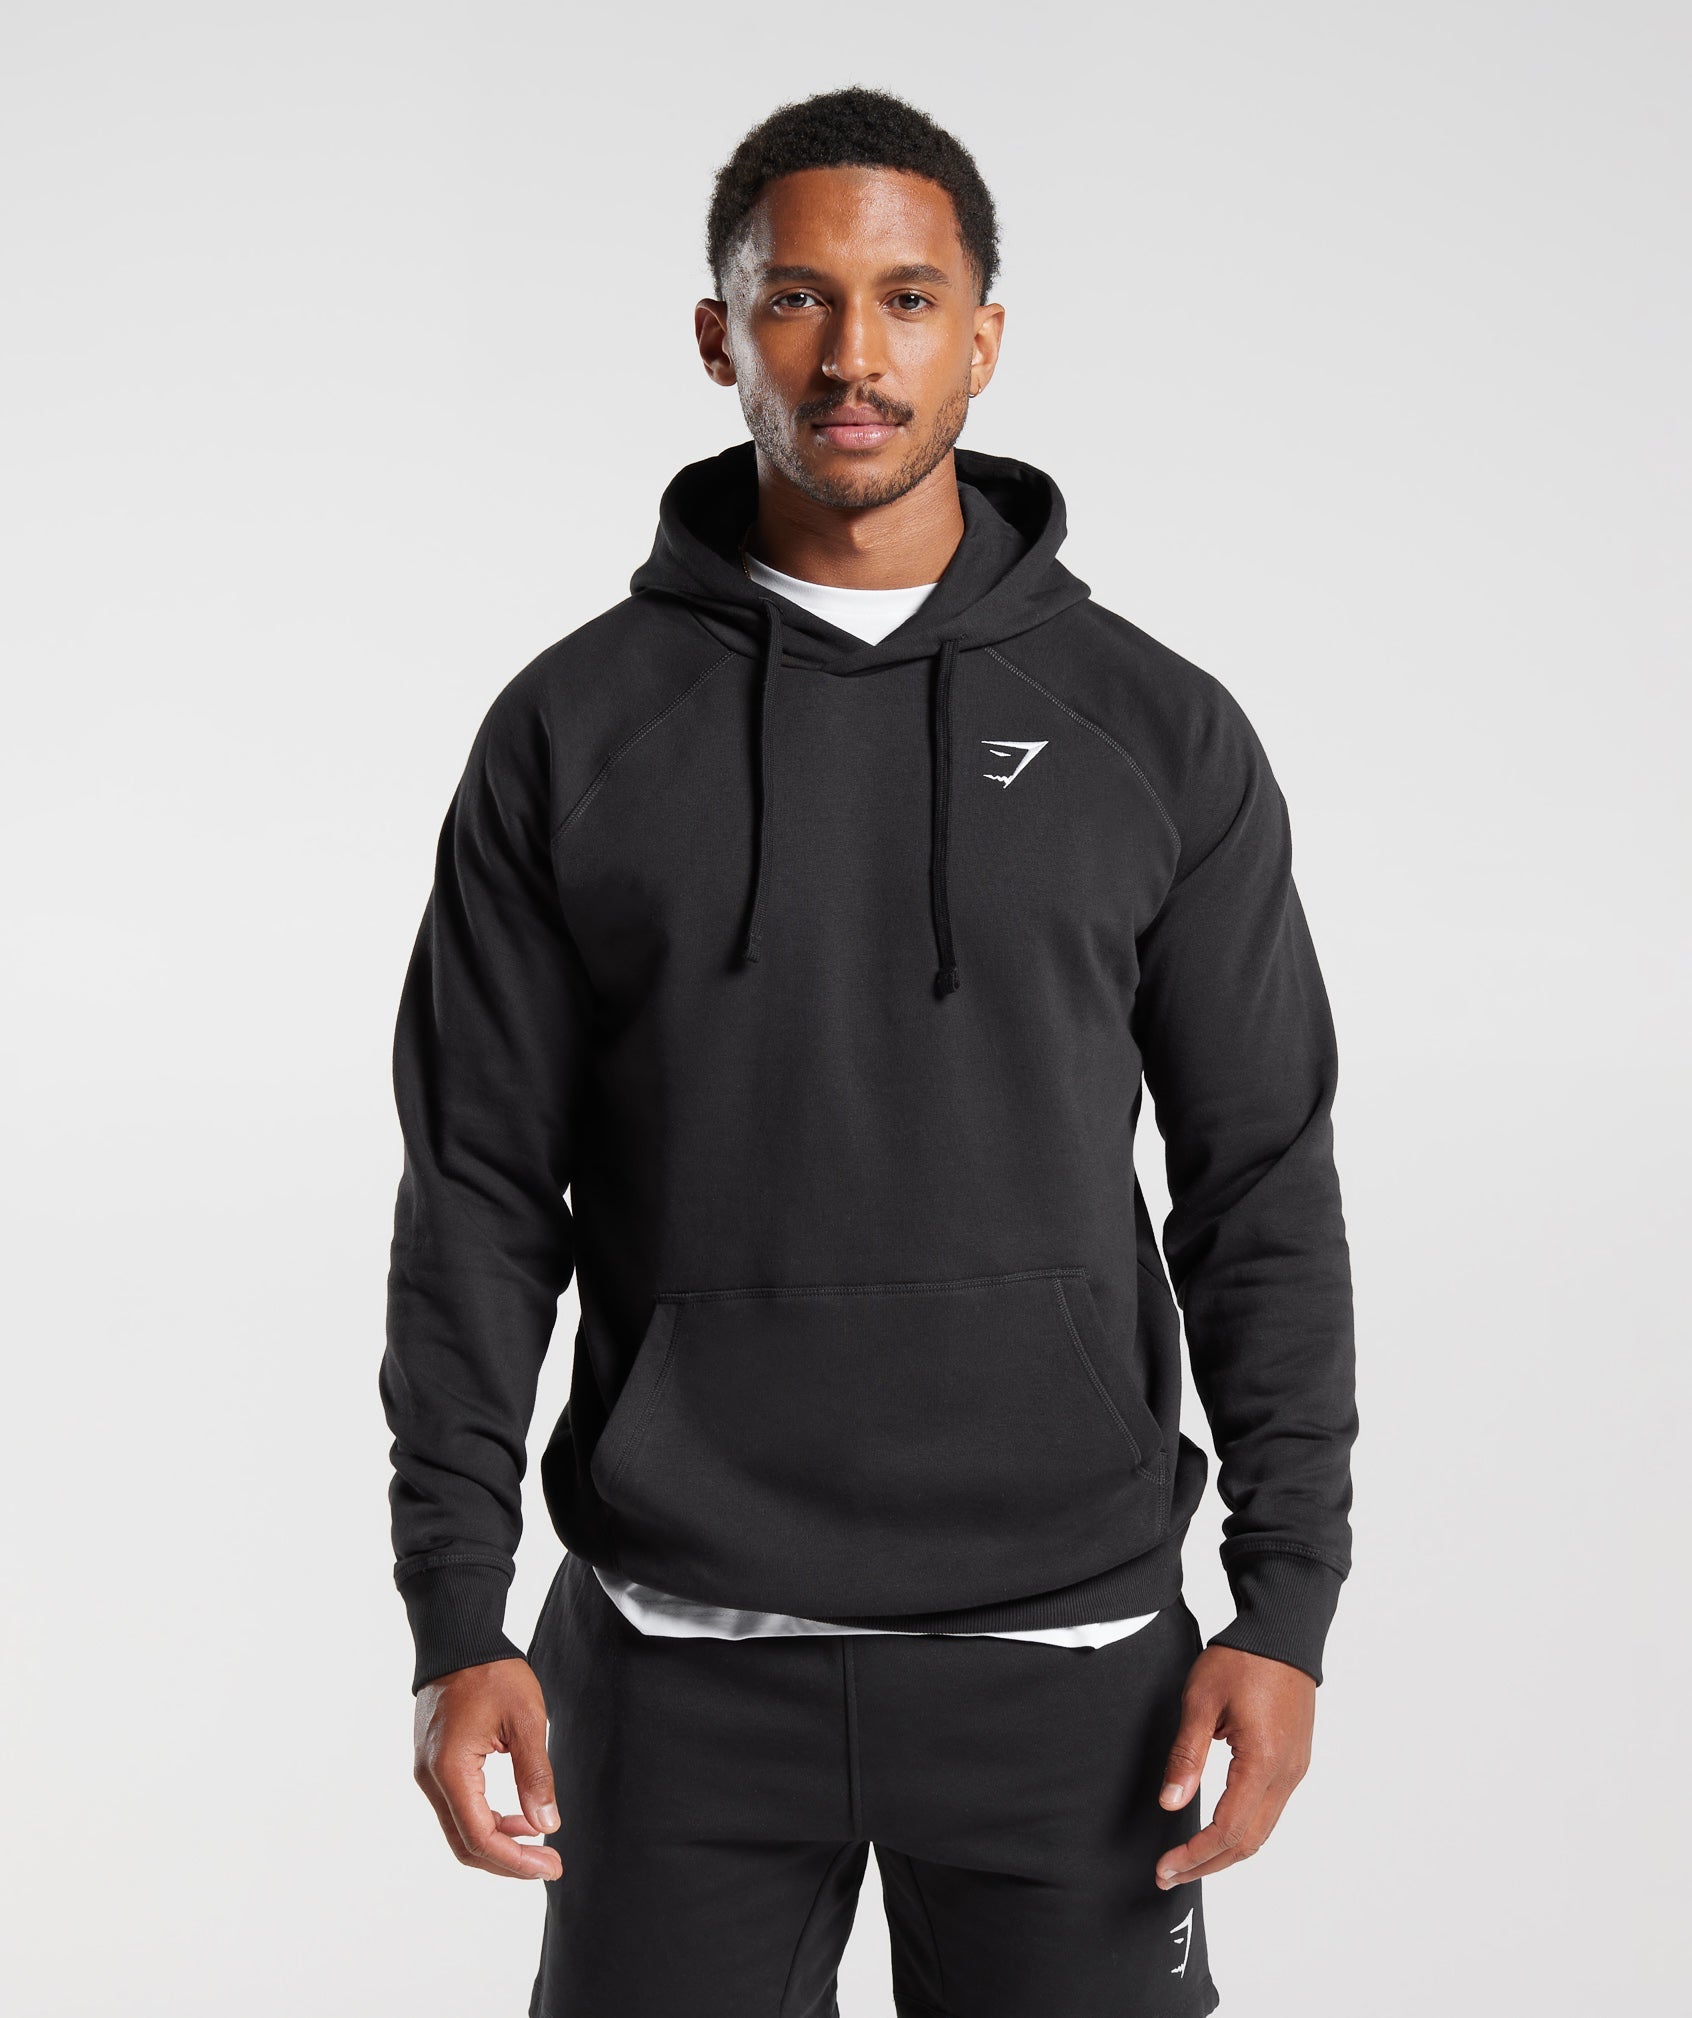 Gymshark : Up to 70% off everything